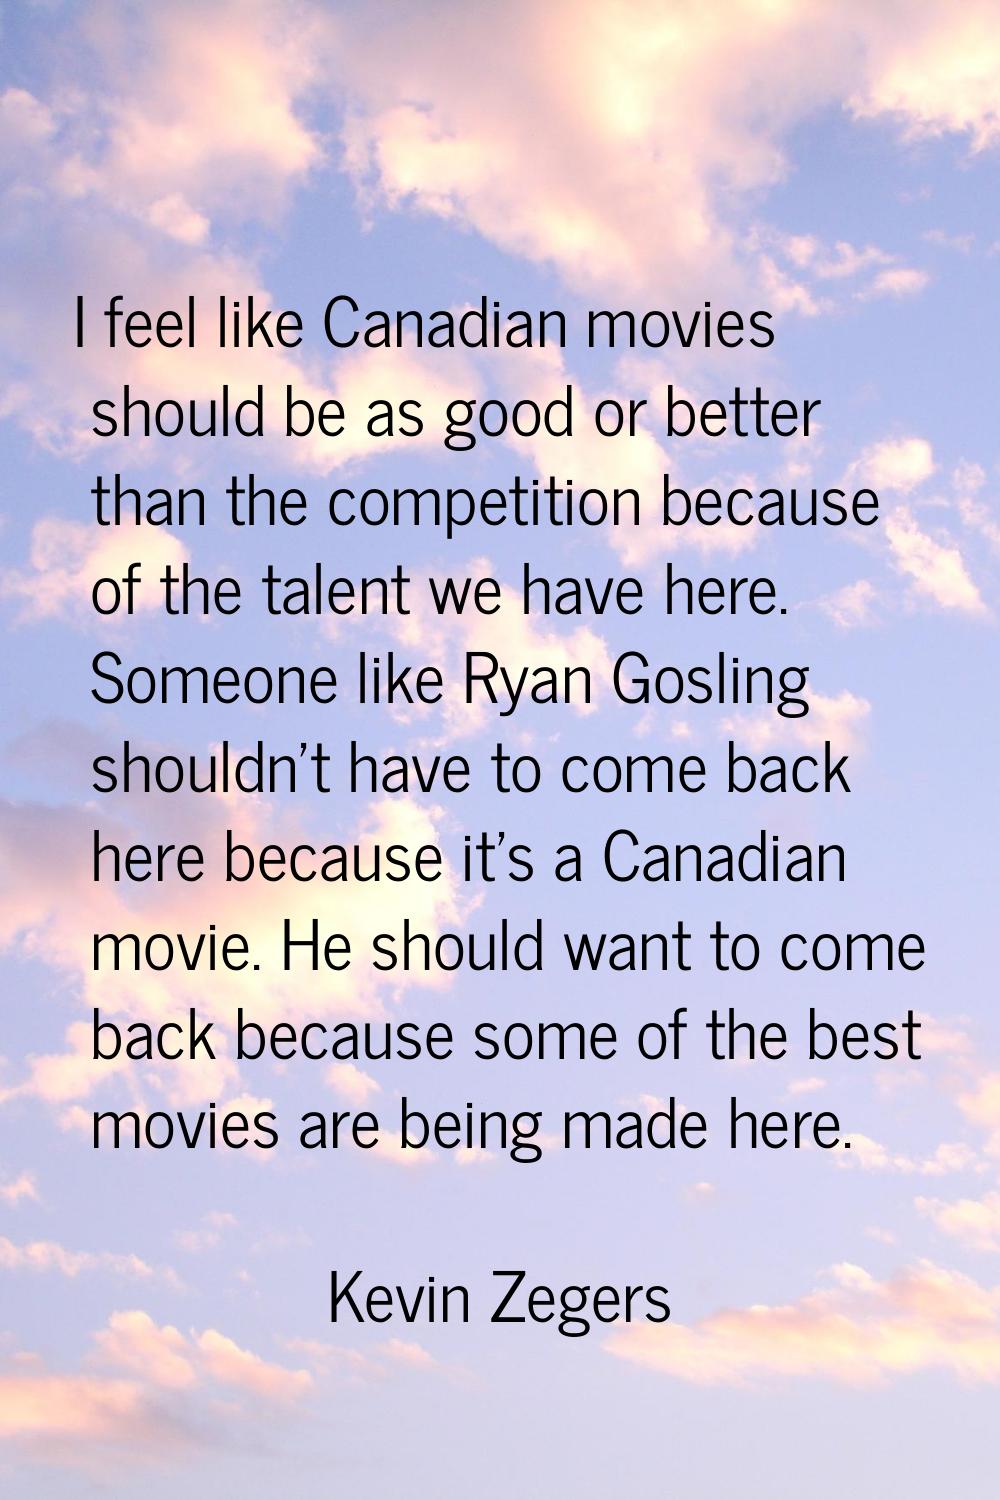 I feel like Canadian movies should be as good or better than the competition because of the talent 